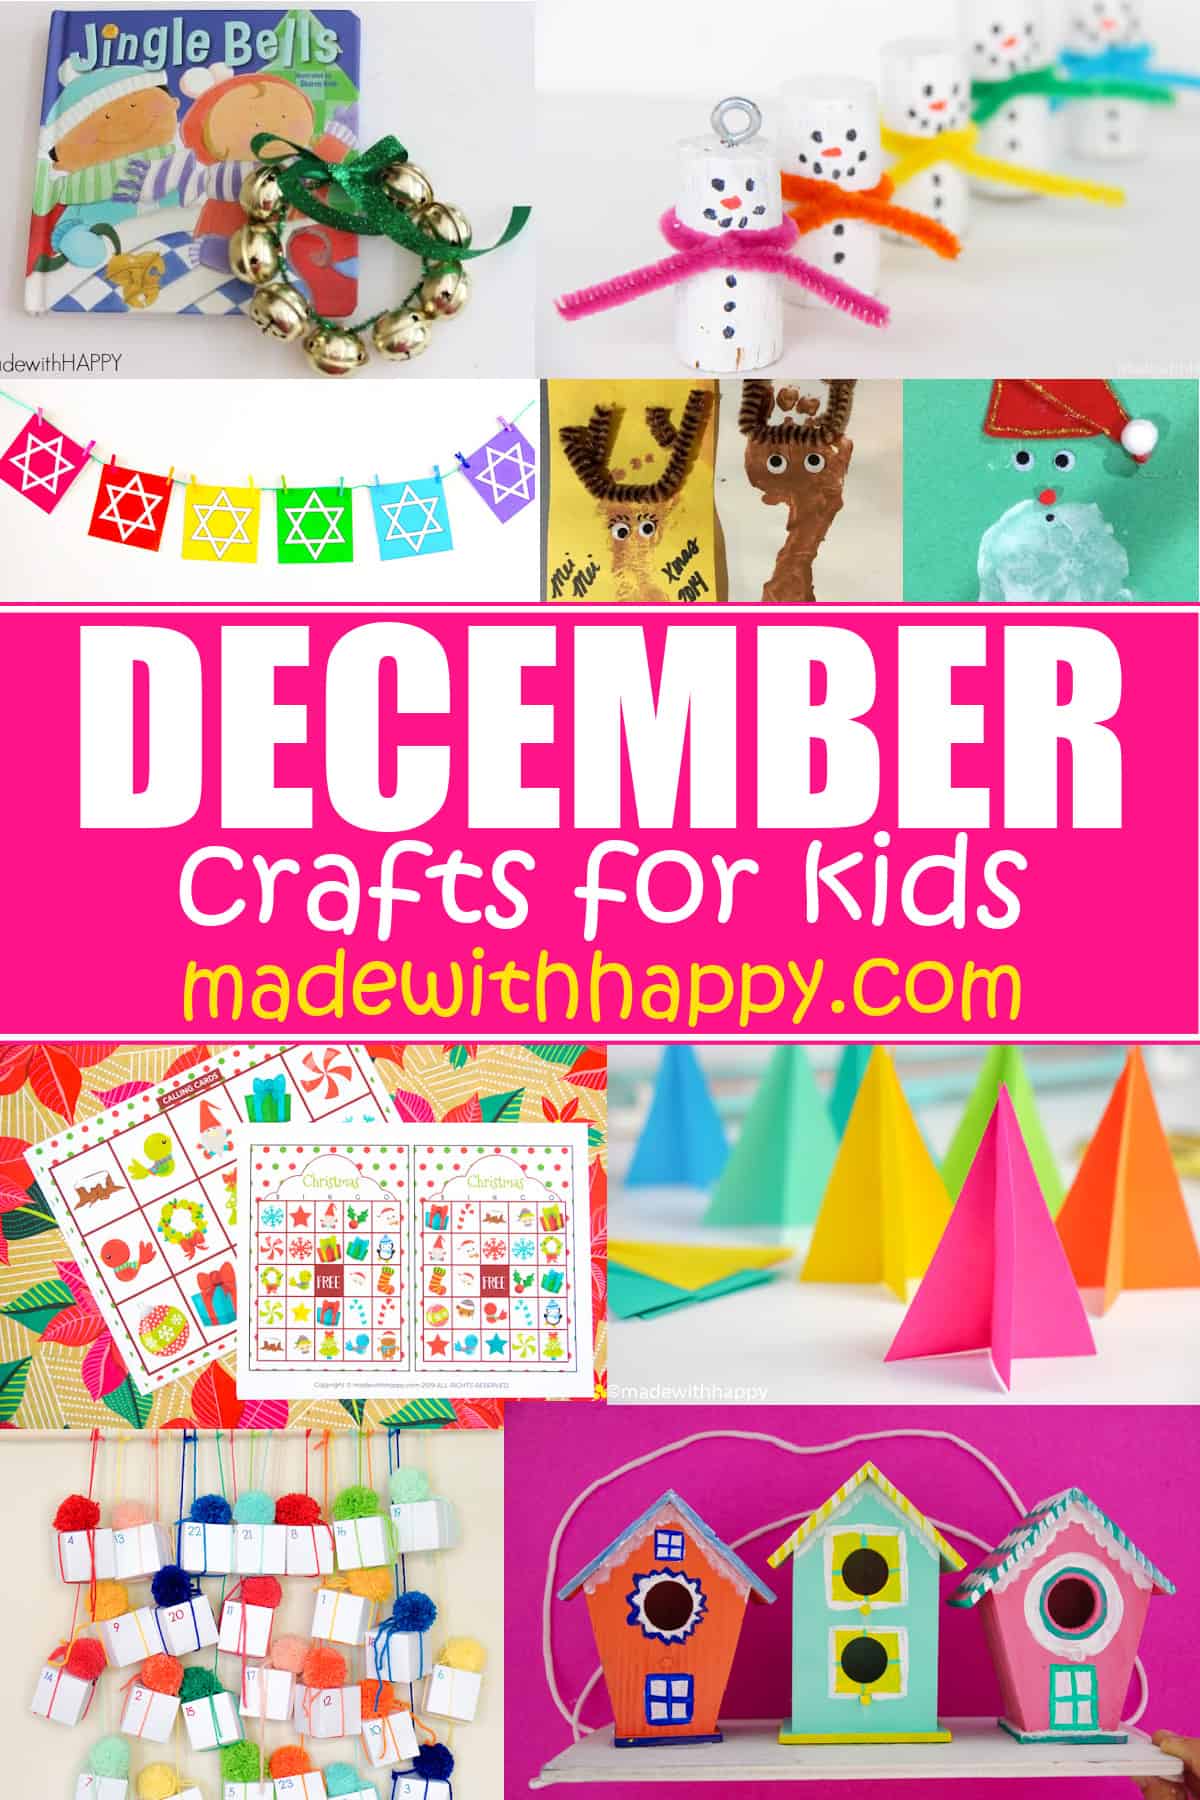 https://www.madewithhappy.com/wp-content/uploads/december-arts-and-crafts.jpg